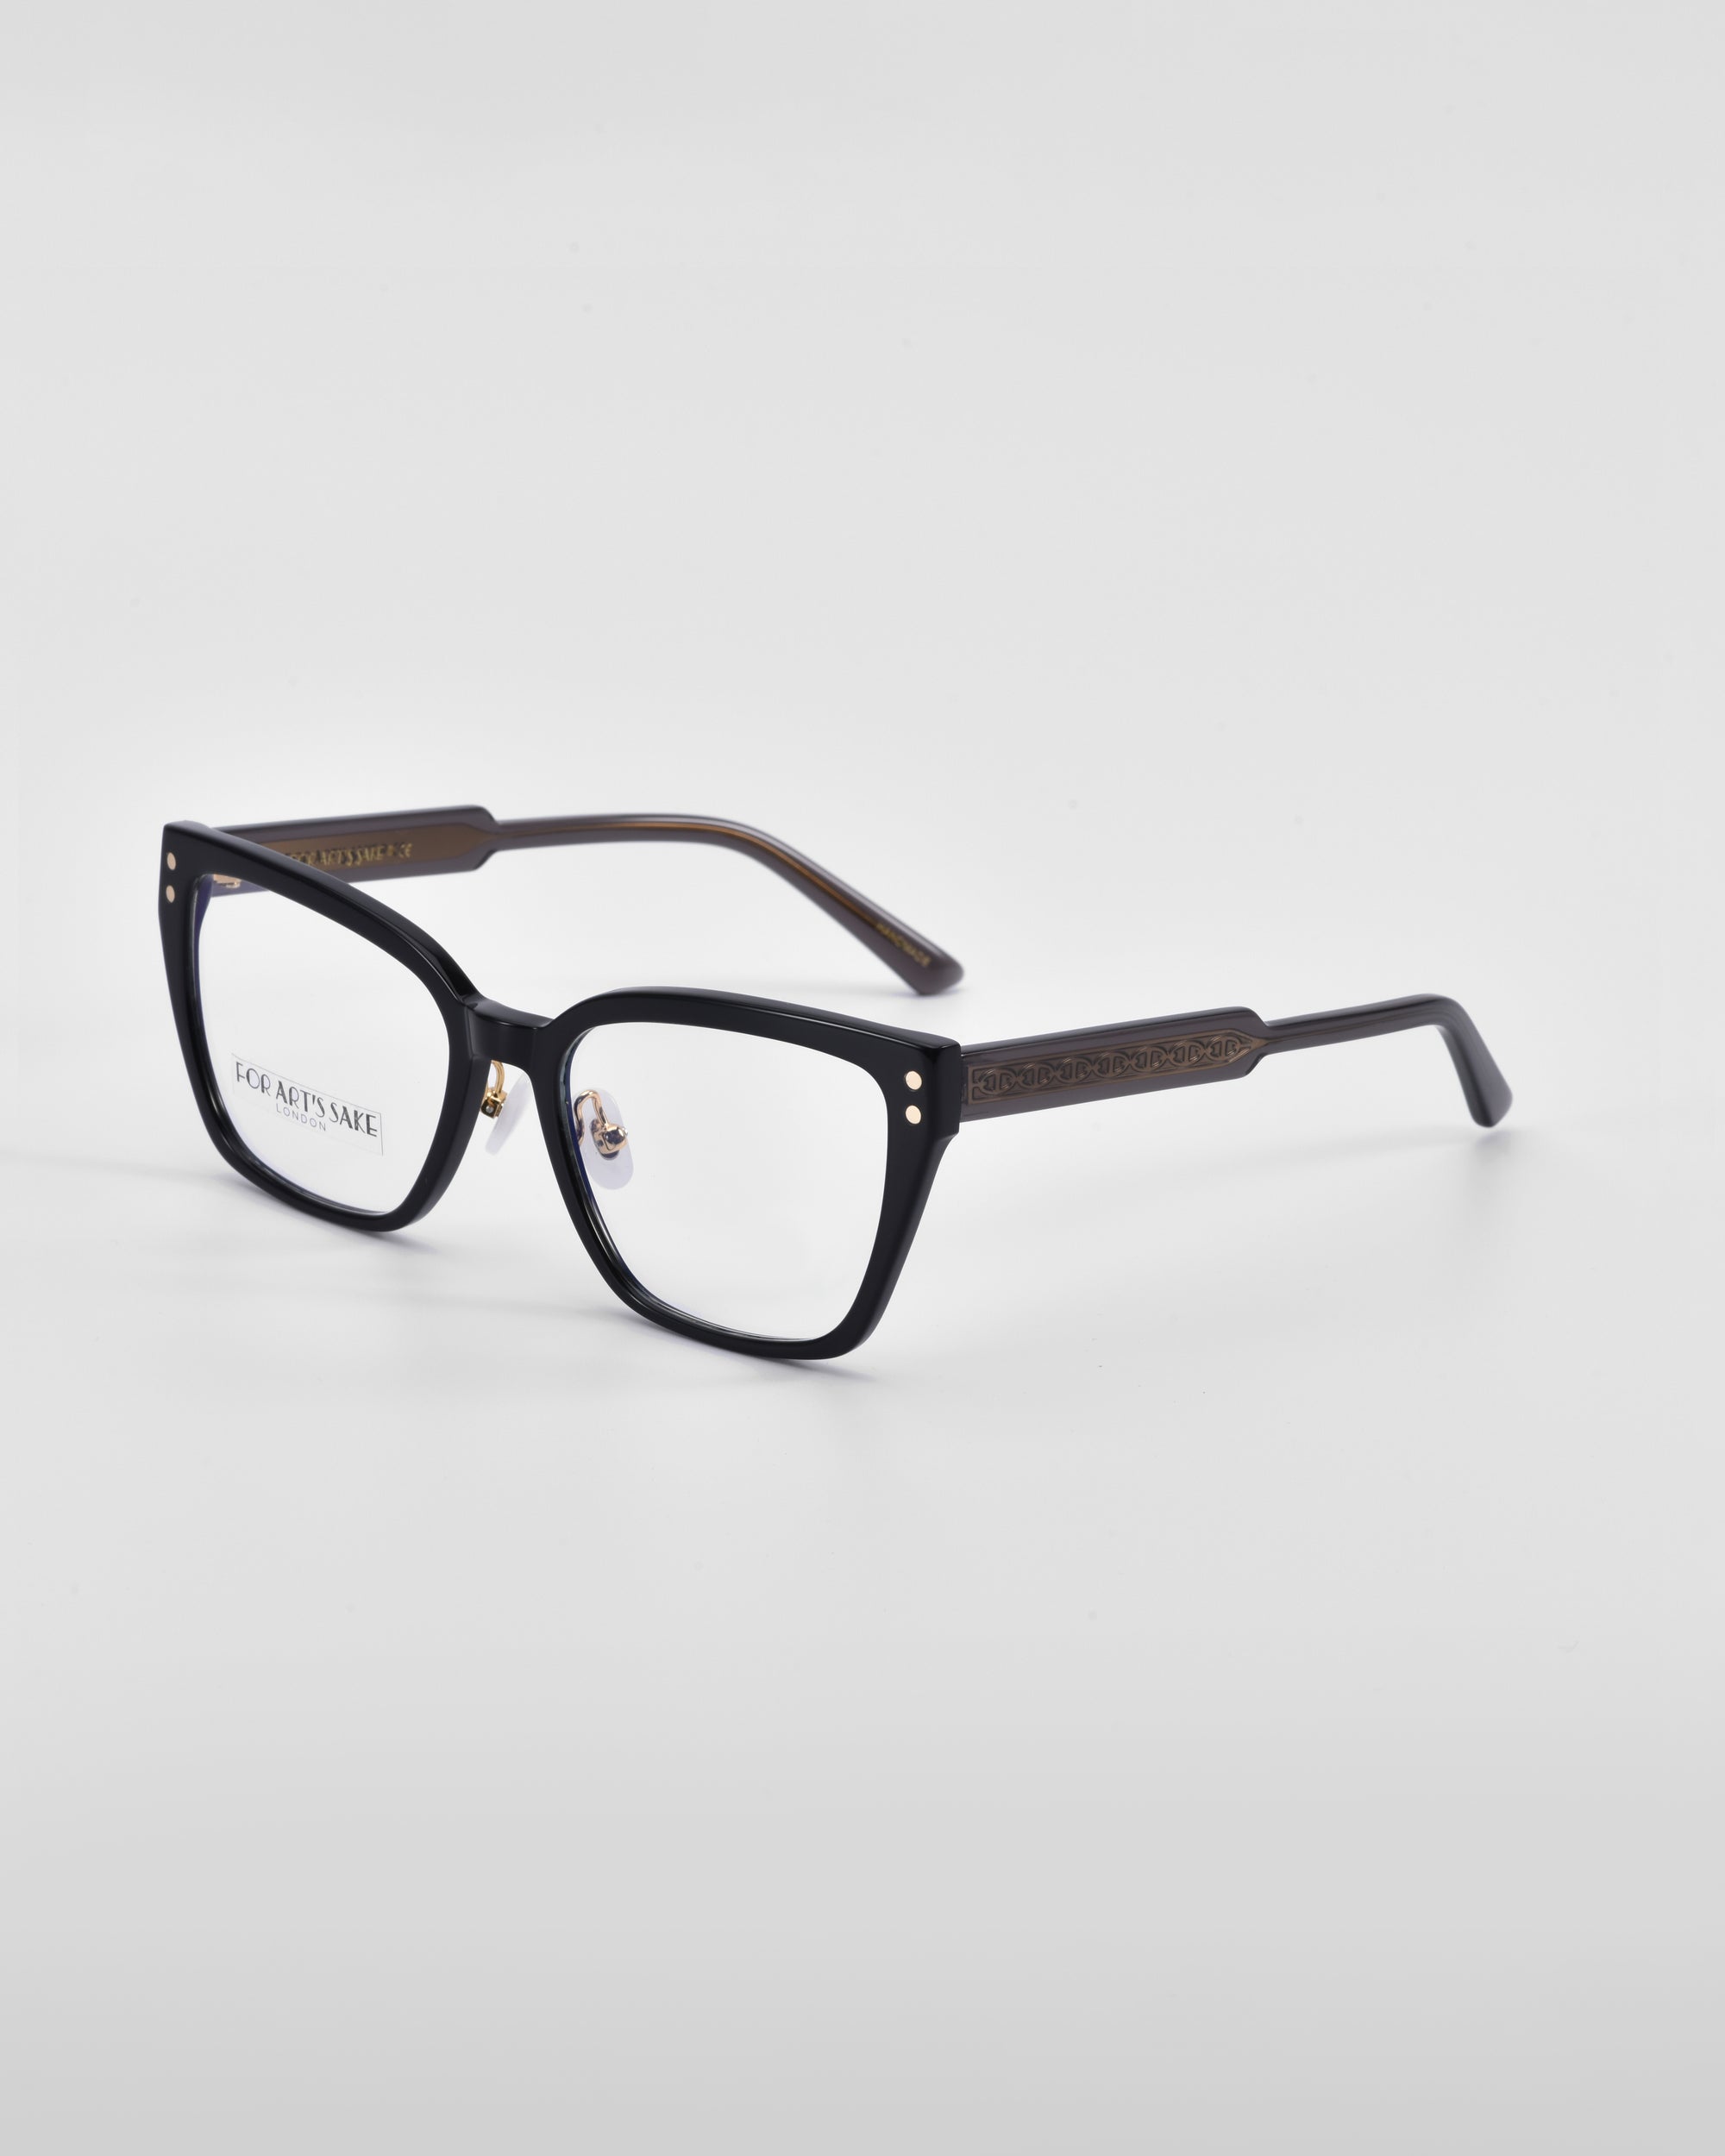 A pair of black rectangular eyeglasses with subtle link-chain pattern detailing on the temples. The glasses have clear lenses and a simple, modern design suitable for both casual and formal wear. The background is a plain, light grey. These are the Abbey eyeglasses by For Art&#39;s Sake®.